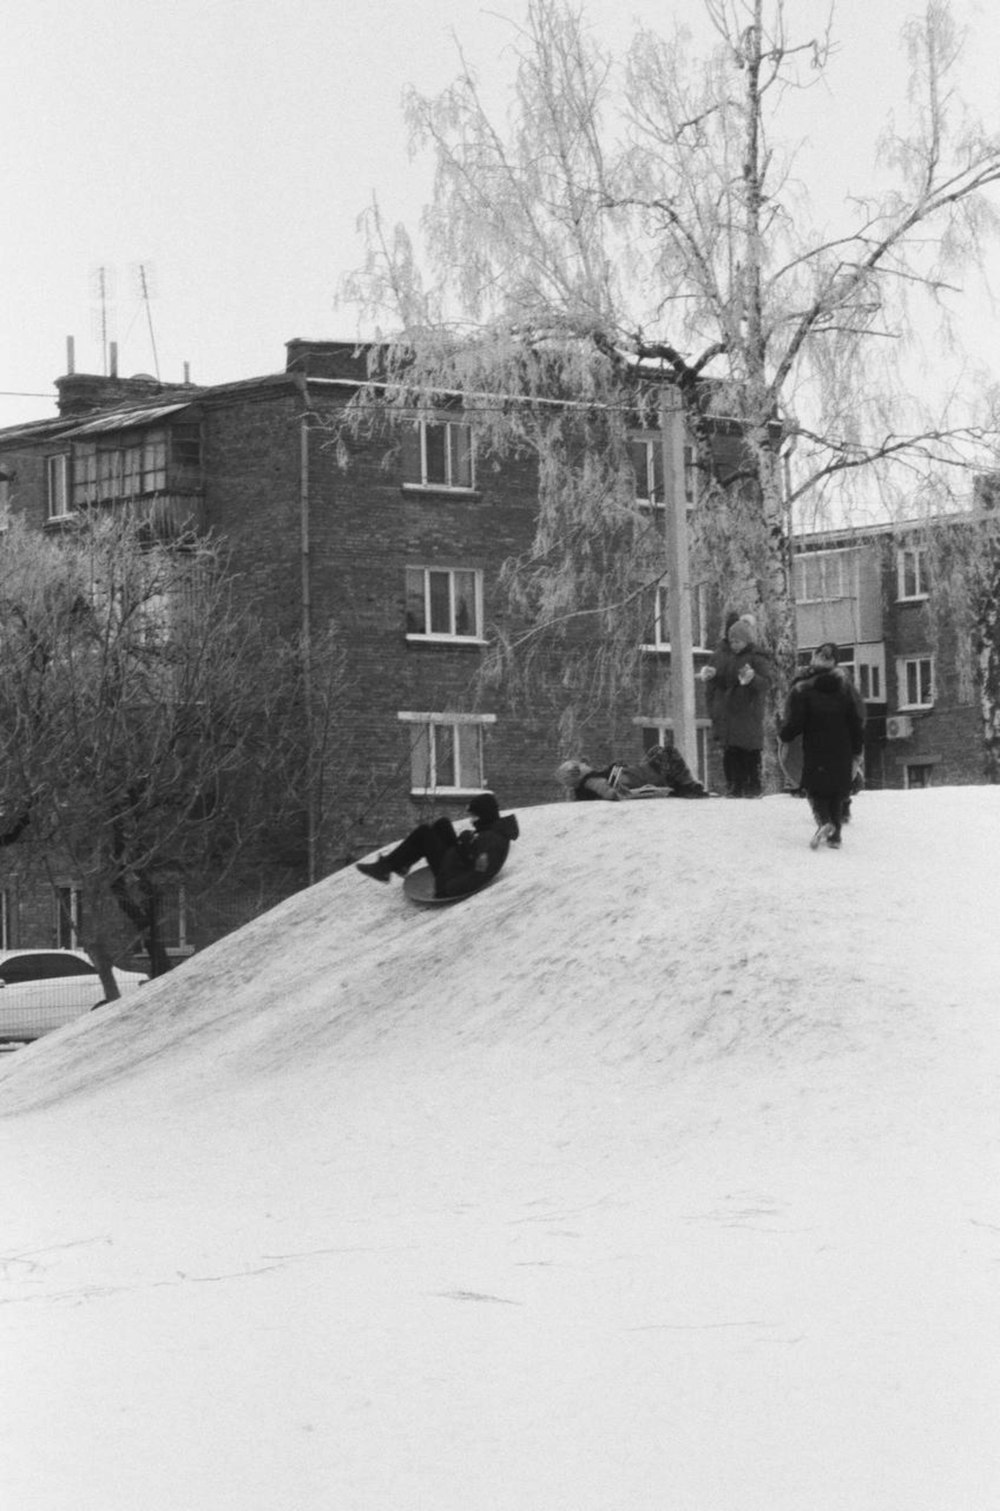 two people walking up a snowy hill in front of a building